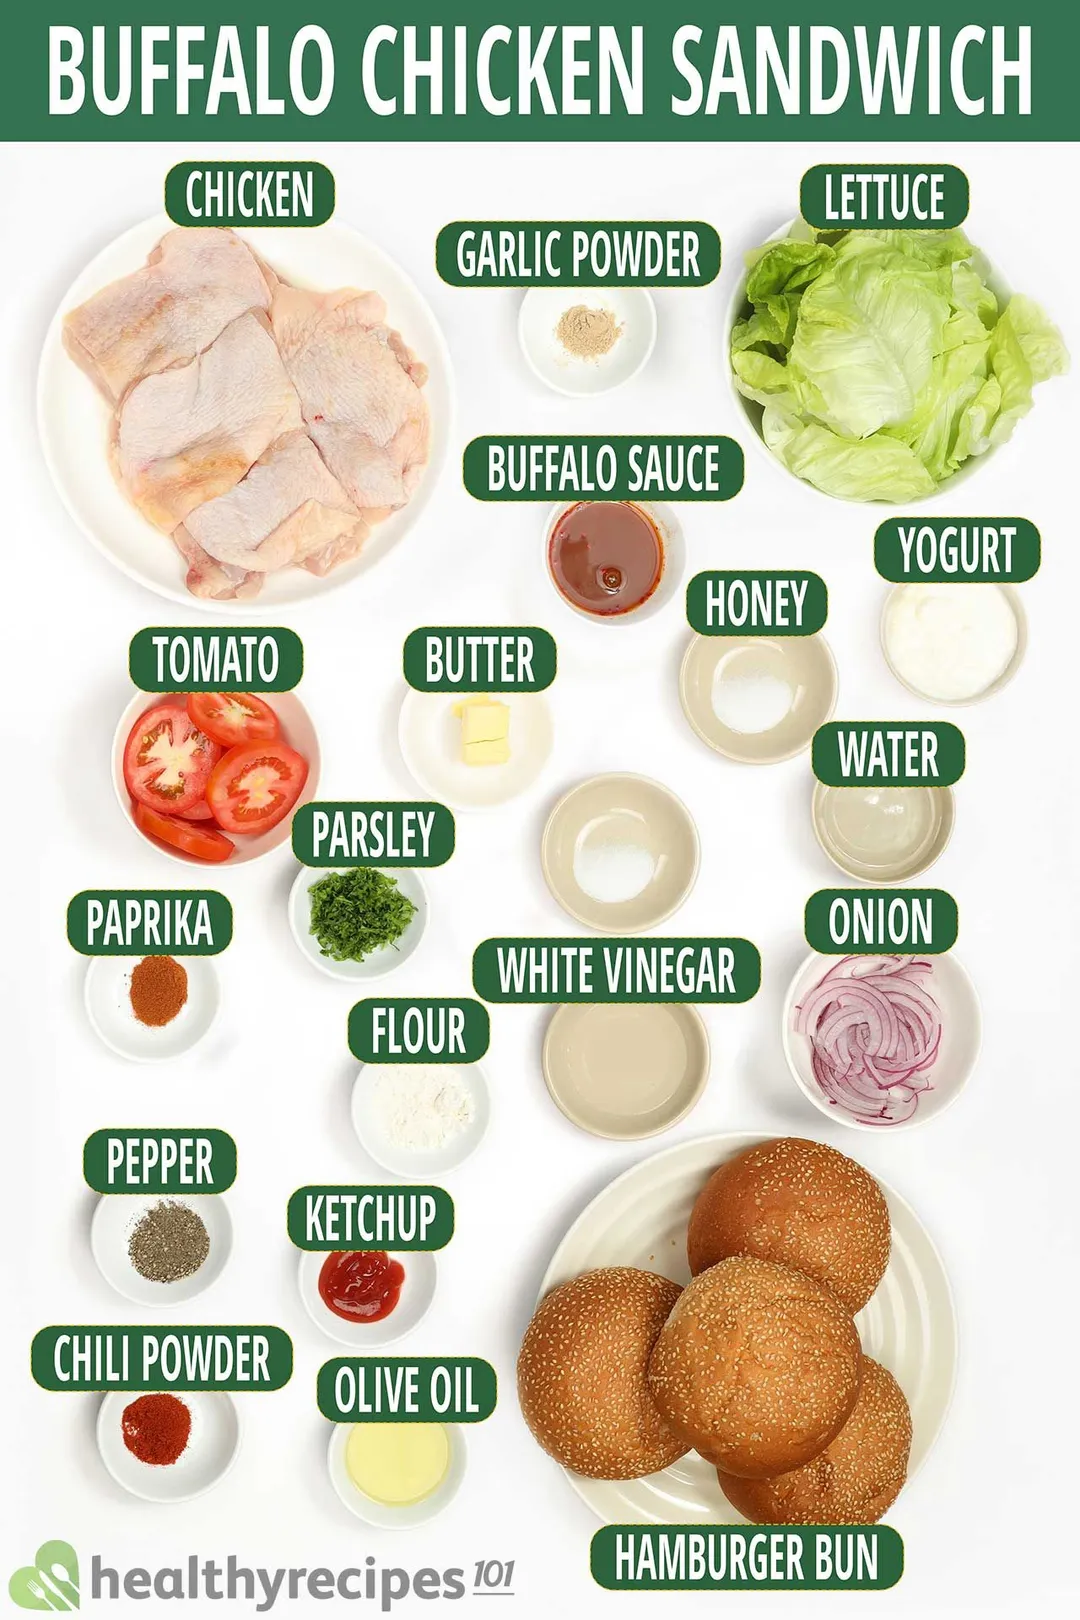 Ingredients for Buffalo chicken sandwich: chicken thighs, hamburger buns, lettuce, onions, tomatoes, and seasonings